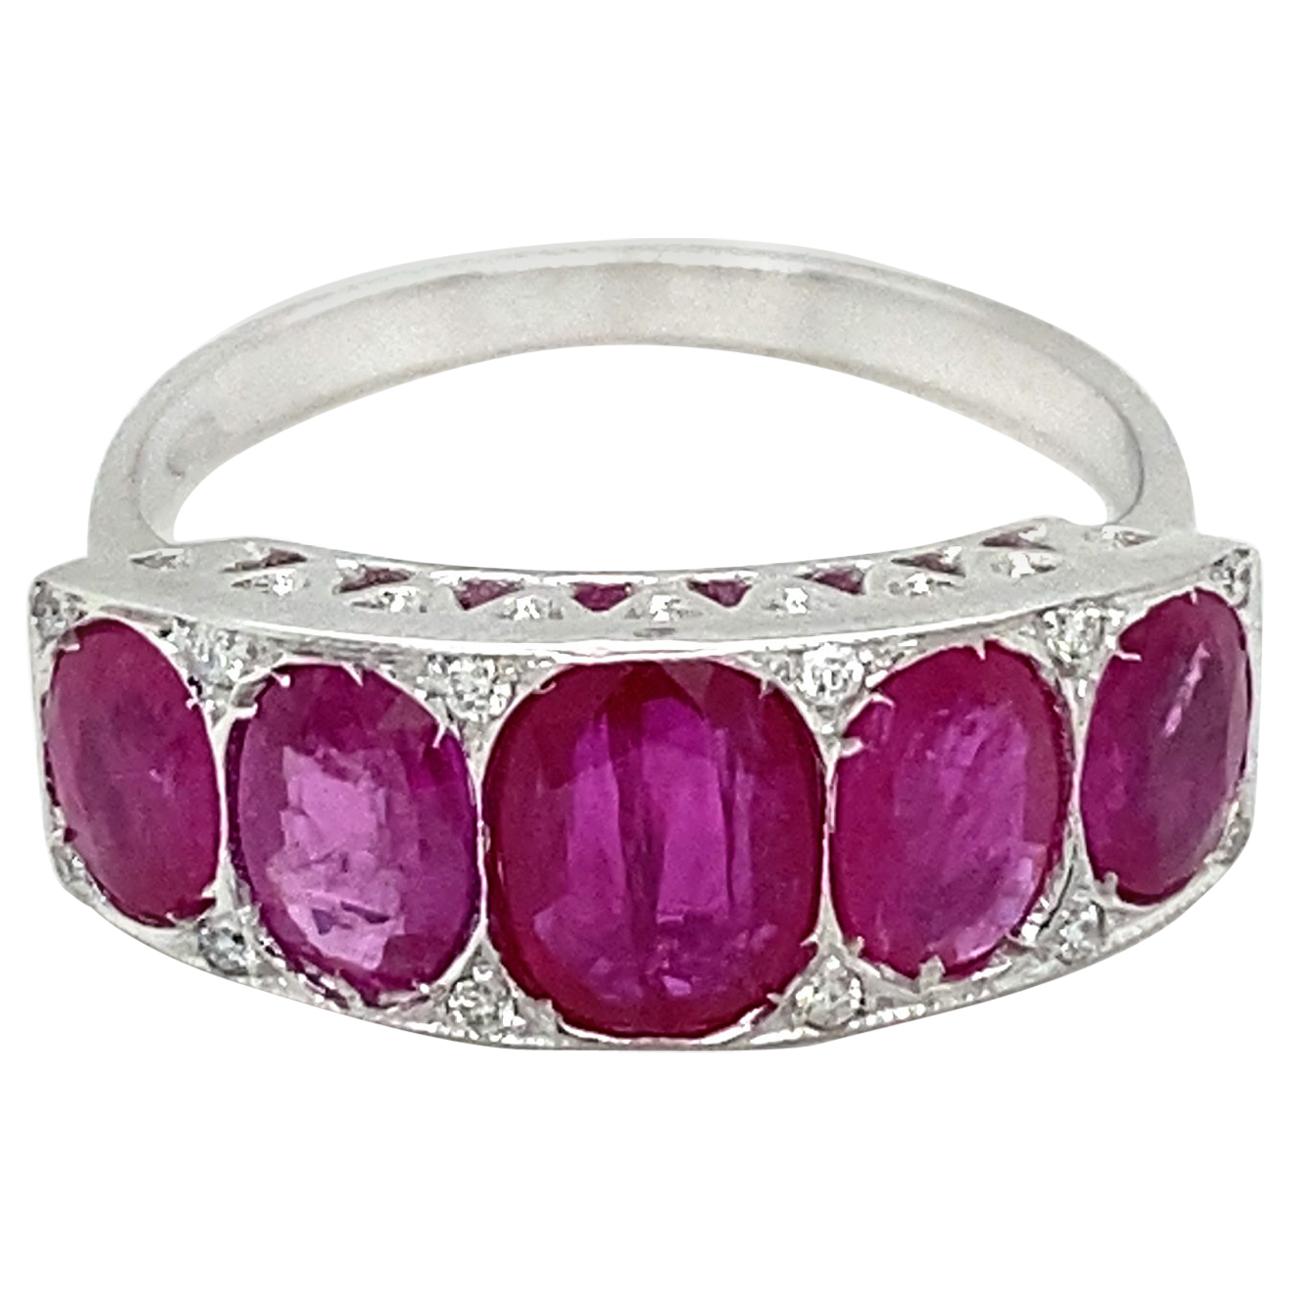 Charming Ruby Diamond Gold ring, all handmade in the Art Deco era, in excellent condition. It is set with five vivid Large Natural Rubies, total weight 3.00 carats, and adorned by 0,12 carat of sparkling Round brilliant cut Diamonds graded F color